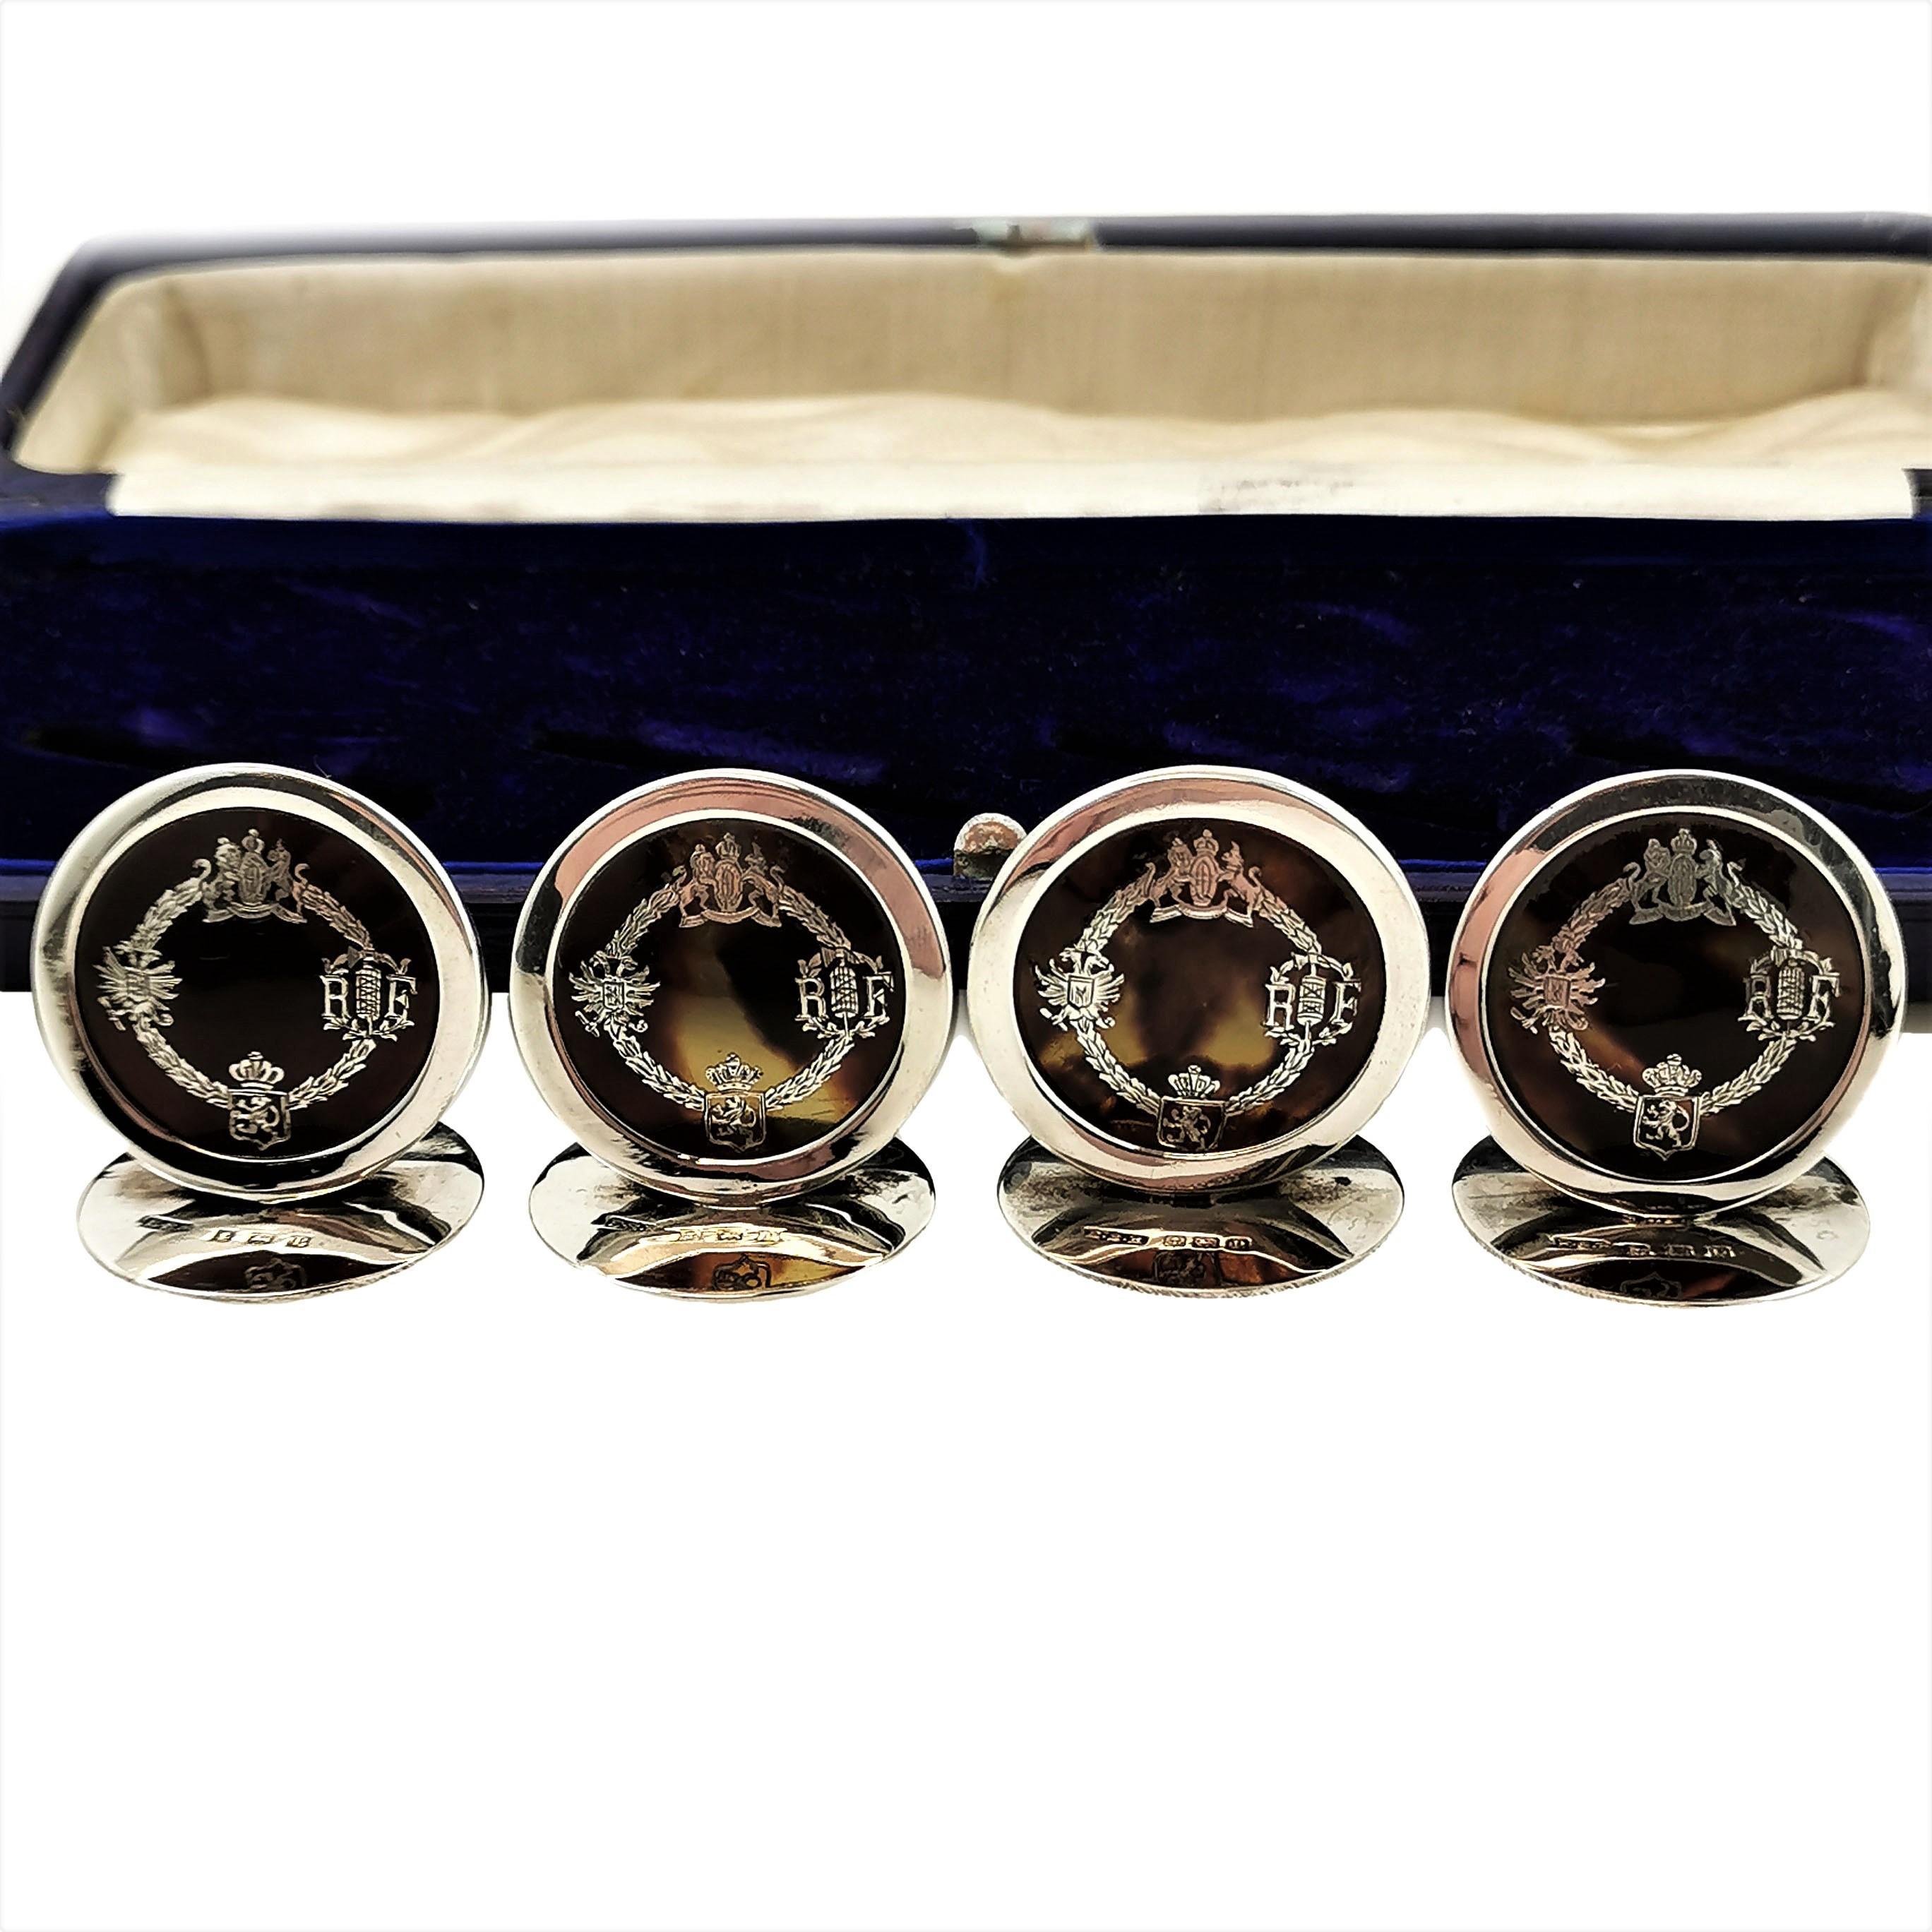 A set of four Antique Silver Menu Holders / Place Card Holders presented in their original fitted case. These round Silver Menu Holders have tortoise shell inserts that are further embellished with a delicate sterling silver design. This design is a